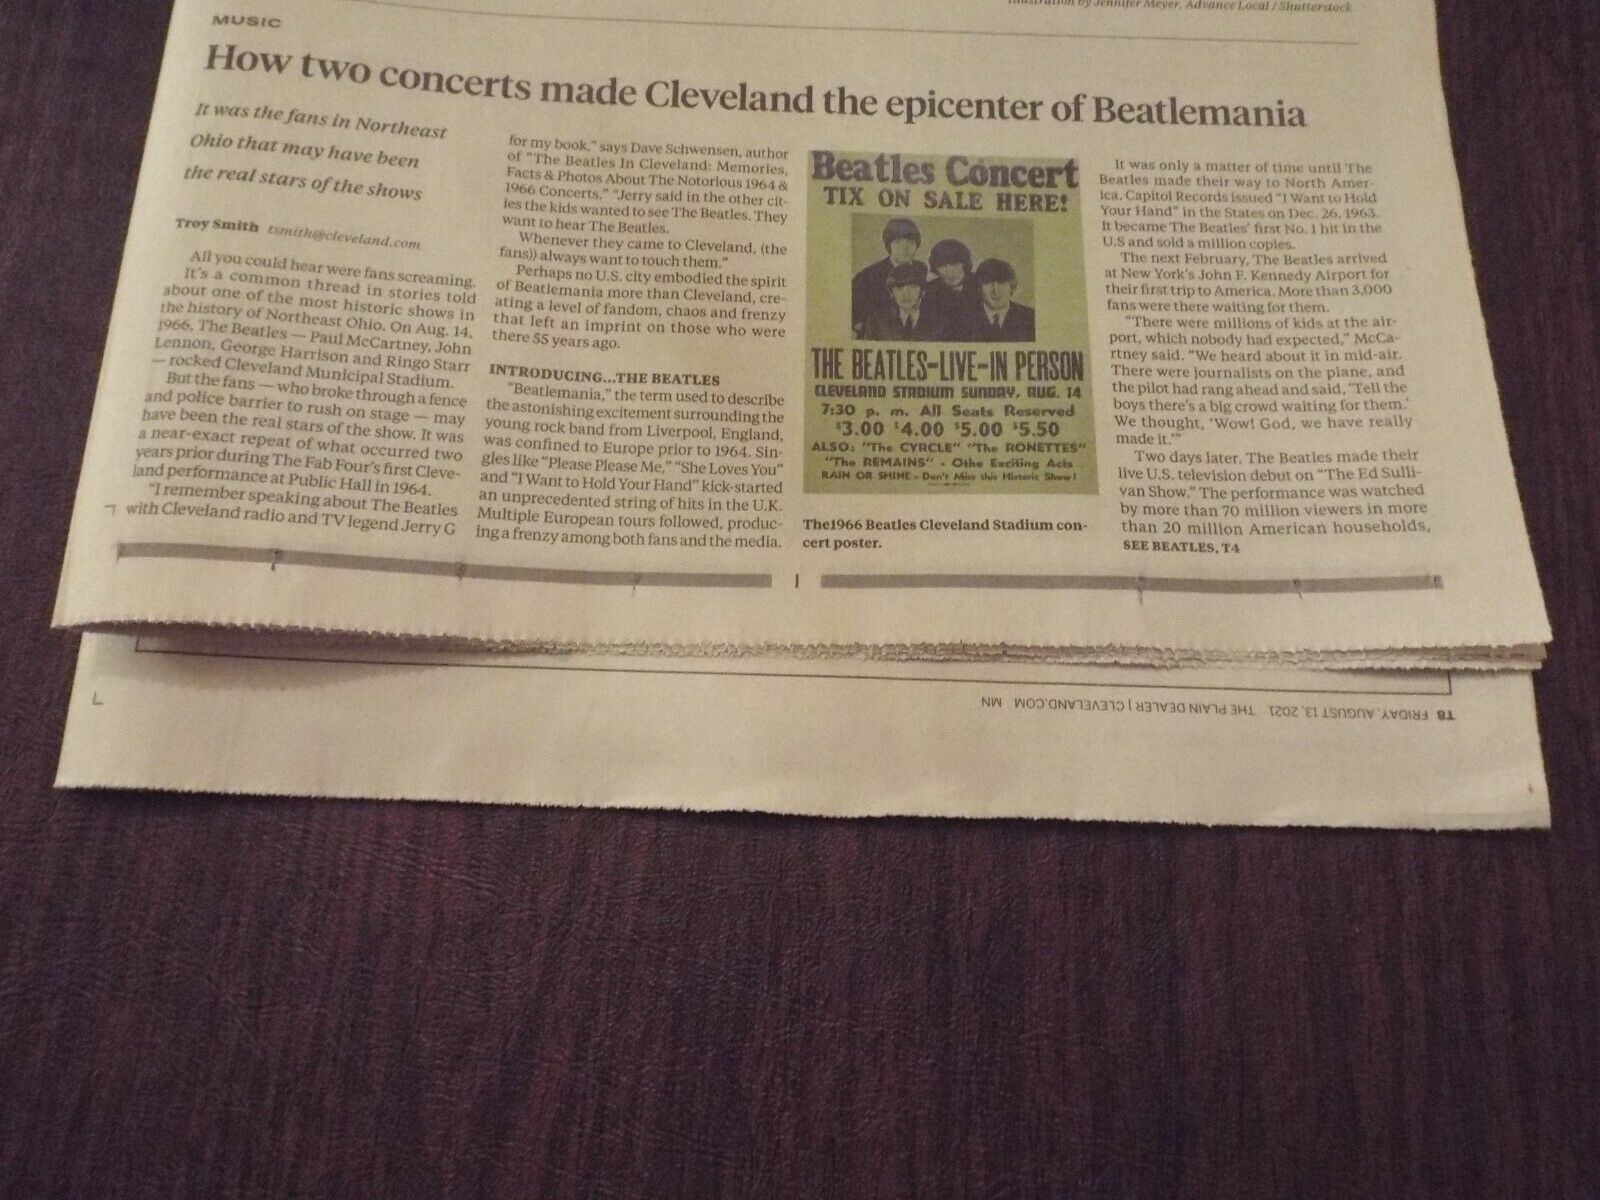 The Beatles Live Newspaper Article On Cleveland Concerts 1964/1966 - 8/13/2021